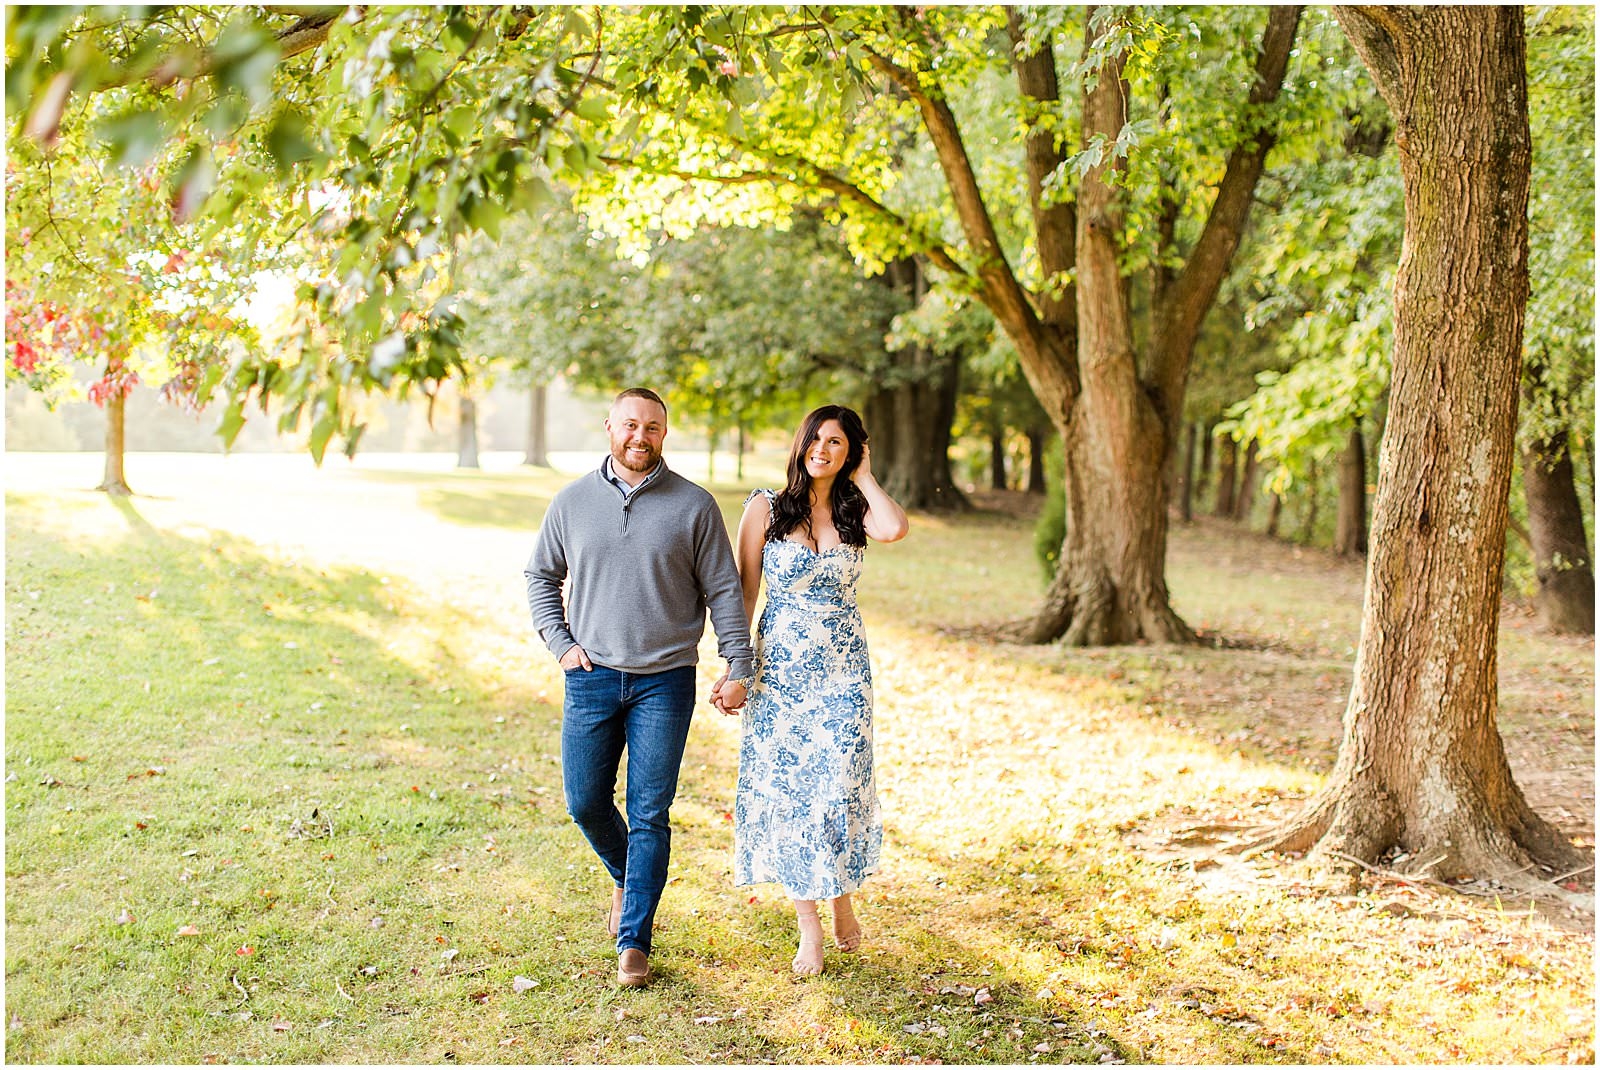 A Rolling Hills Country Club Engagement Session | Meagan and Kyle | Bret and Brandie Photography 0033.jpg